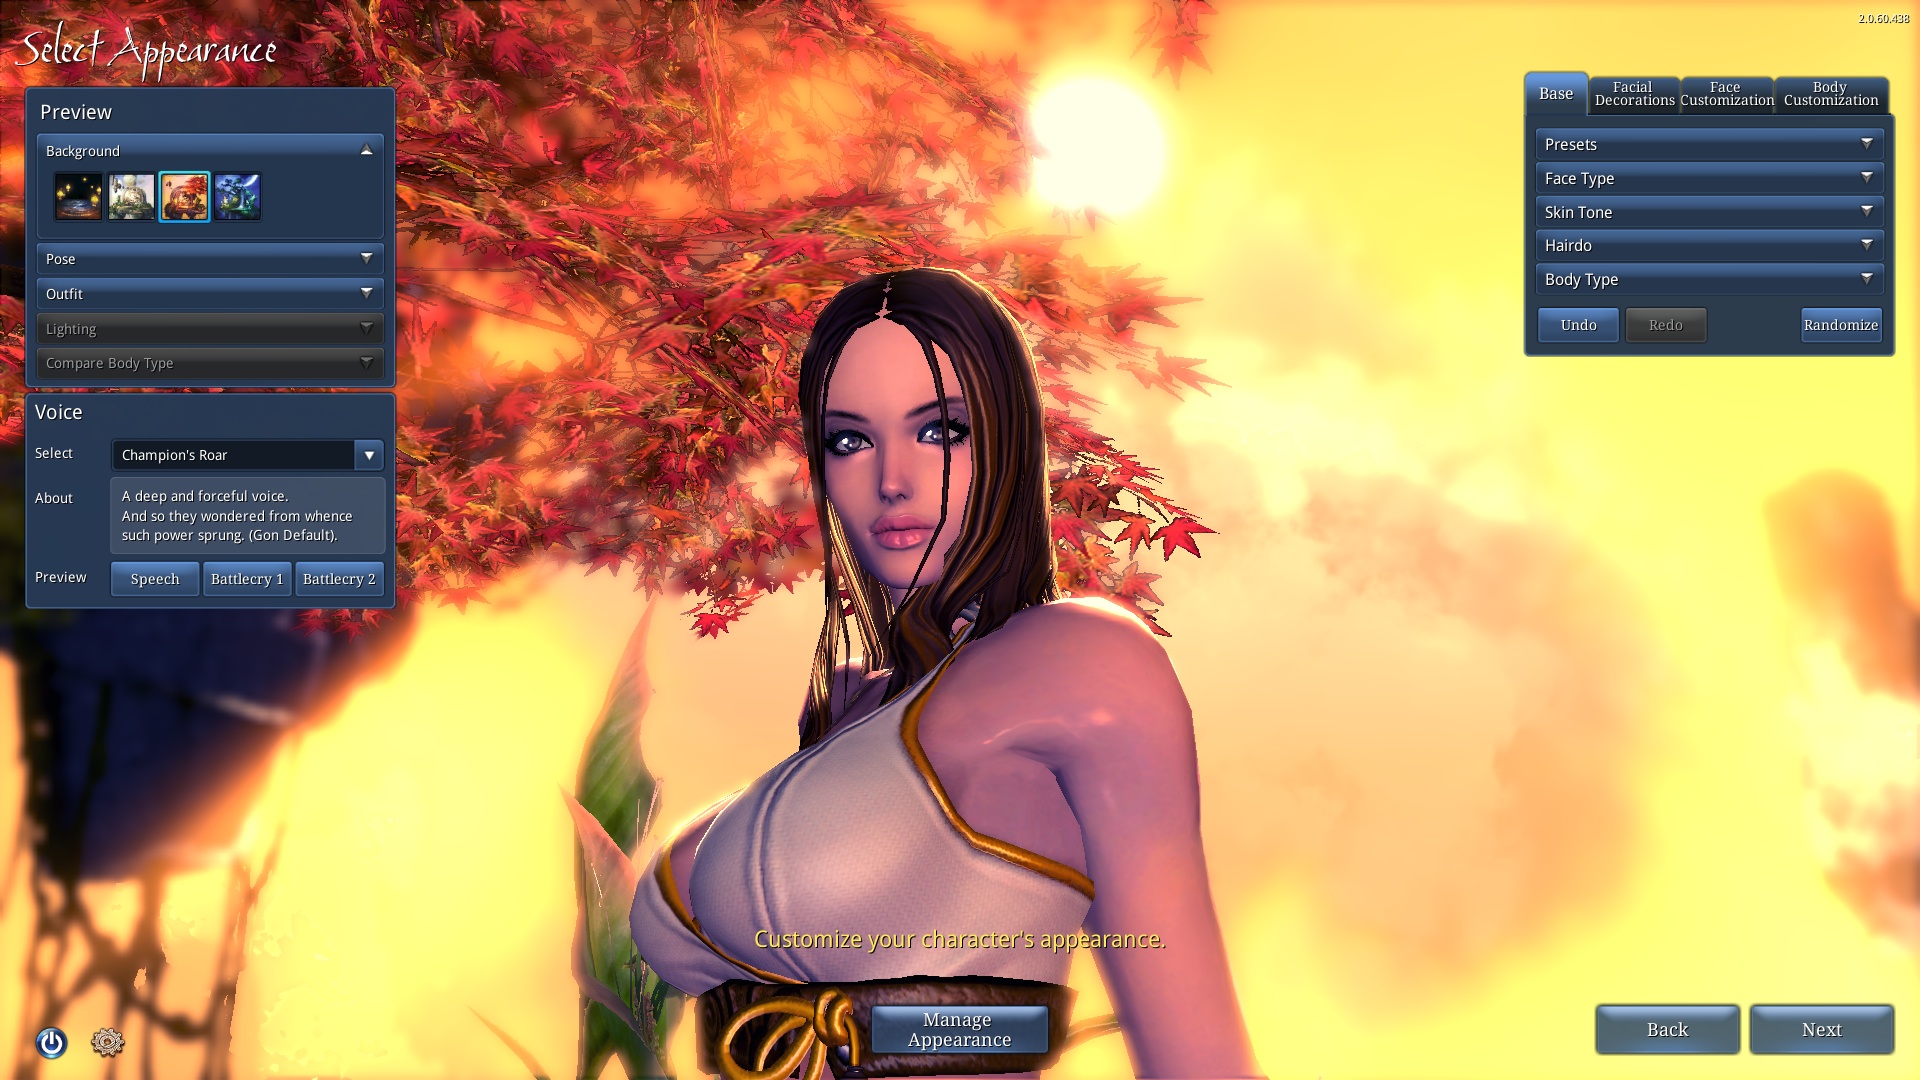 Angelina Jolies Tits - Just made a preset of Angelina Jolie - Fan Creations - Blade & Soul Forums